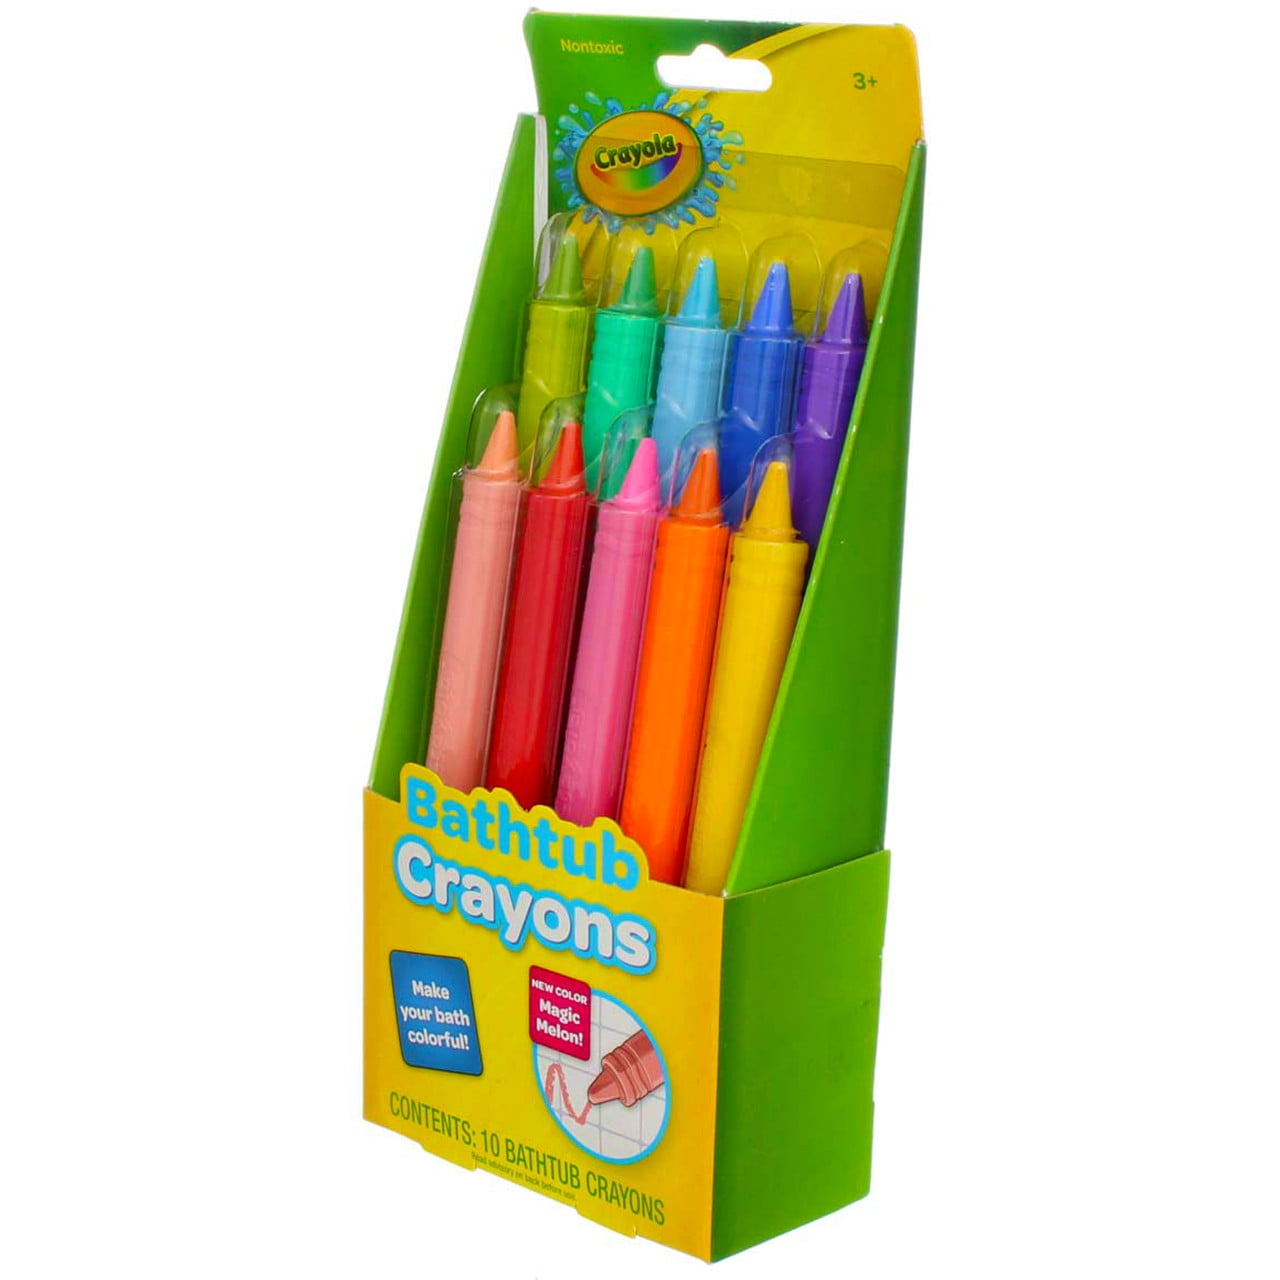 Baby Bath Crayons Easy Clean Safe For Young Children 